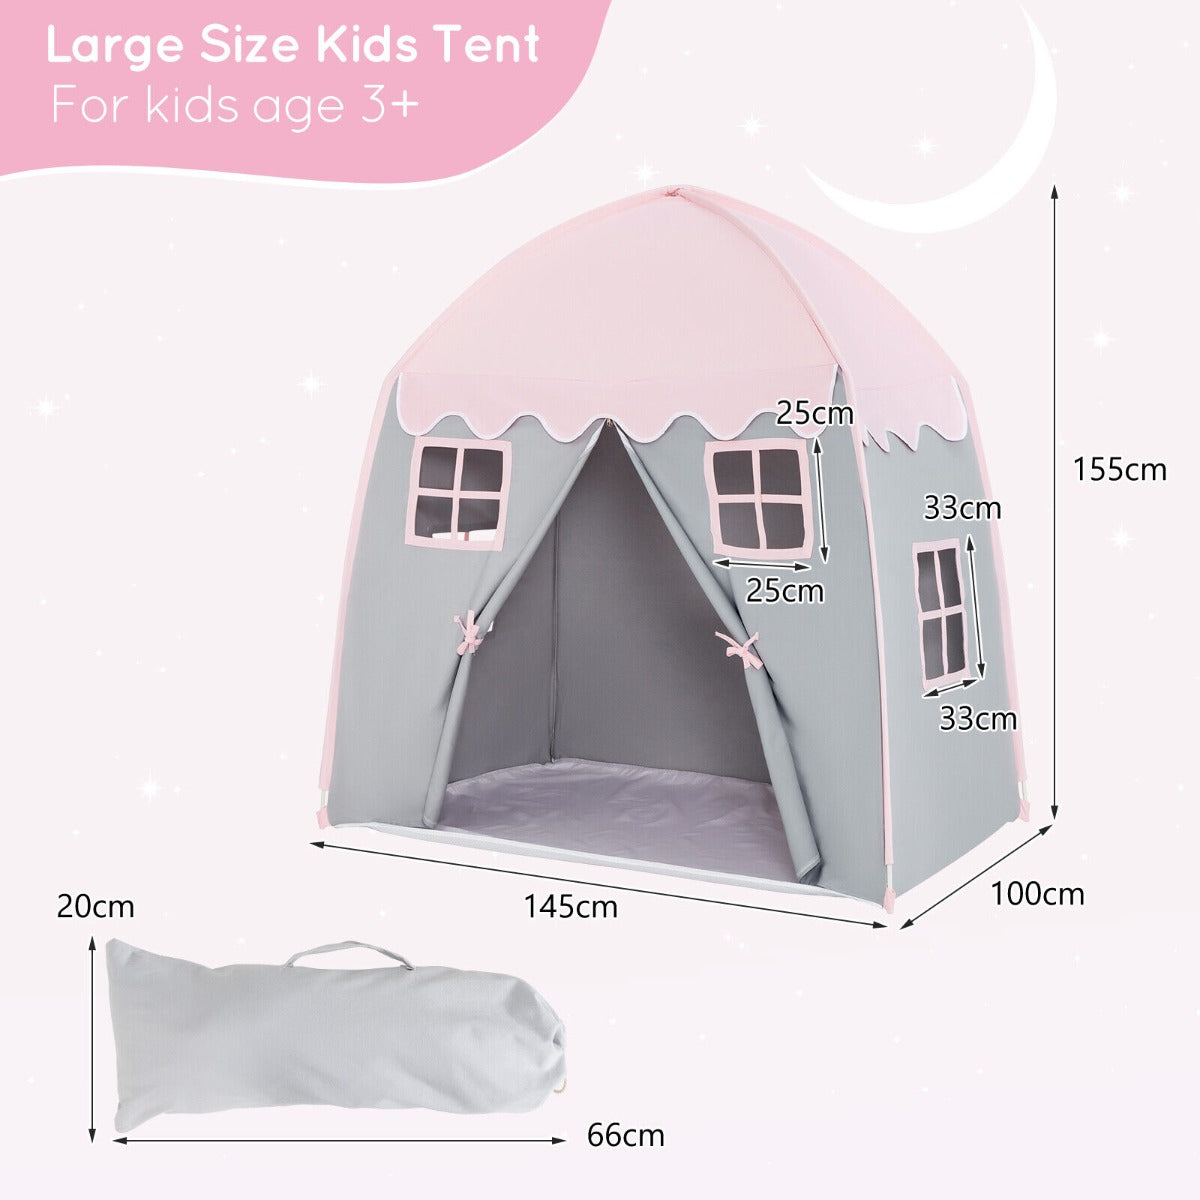 Large Indoor Outdoor Portable Fairy Kids Play Tent with Storage